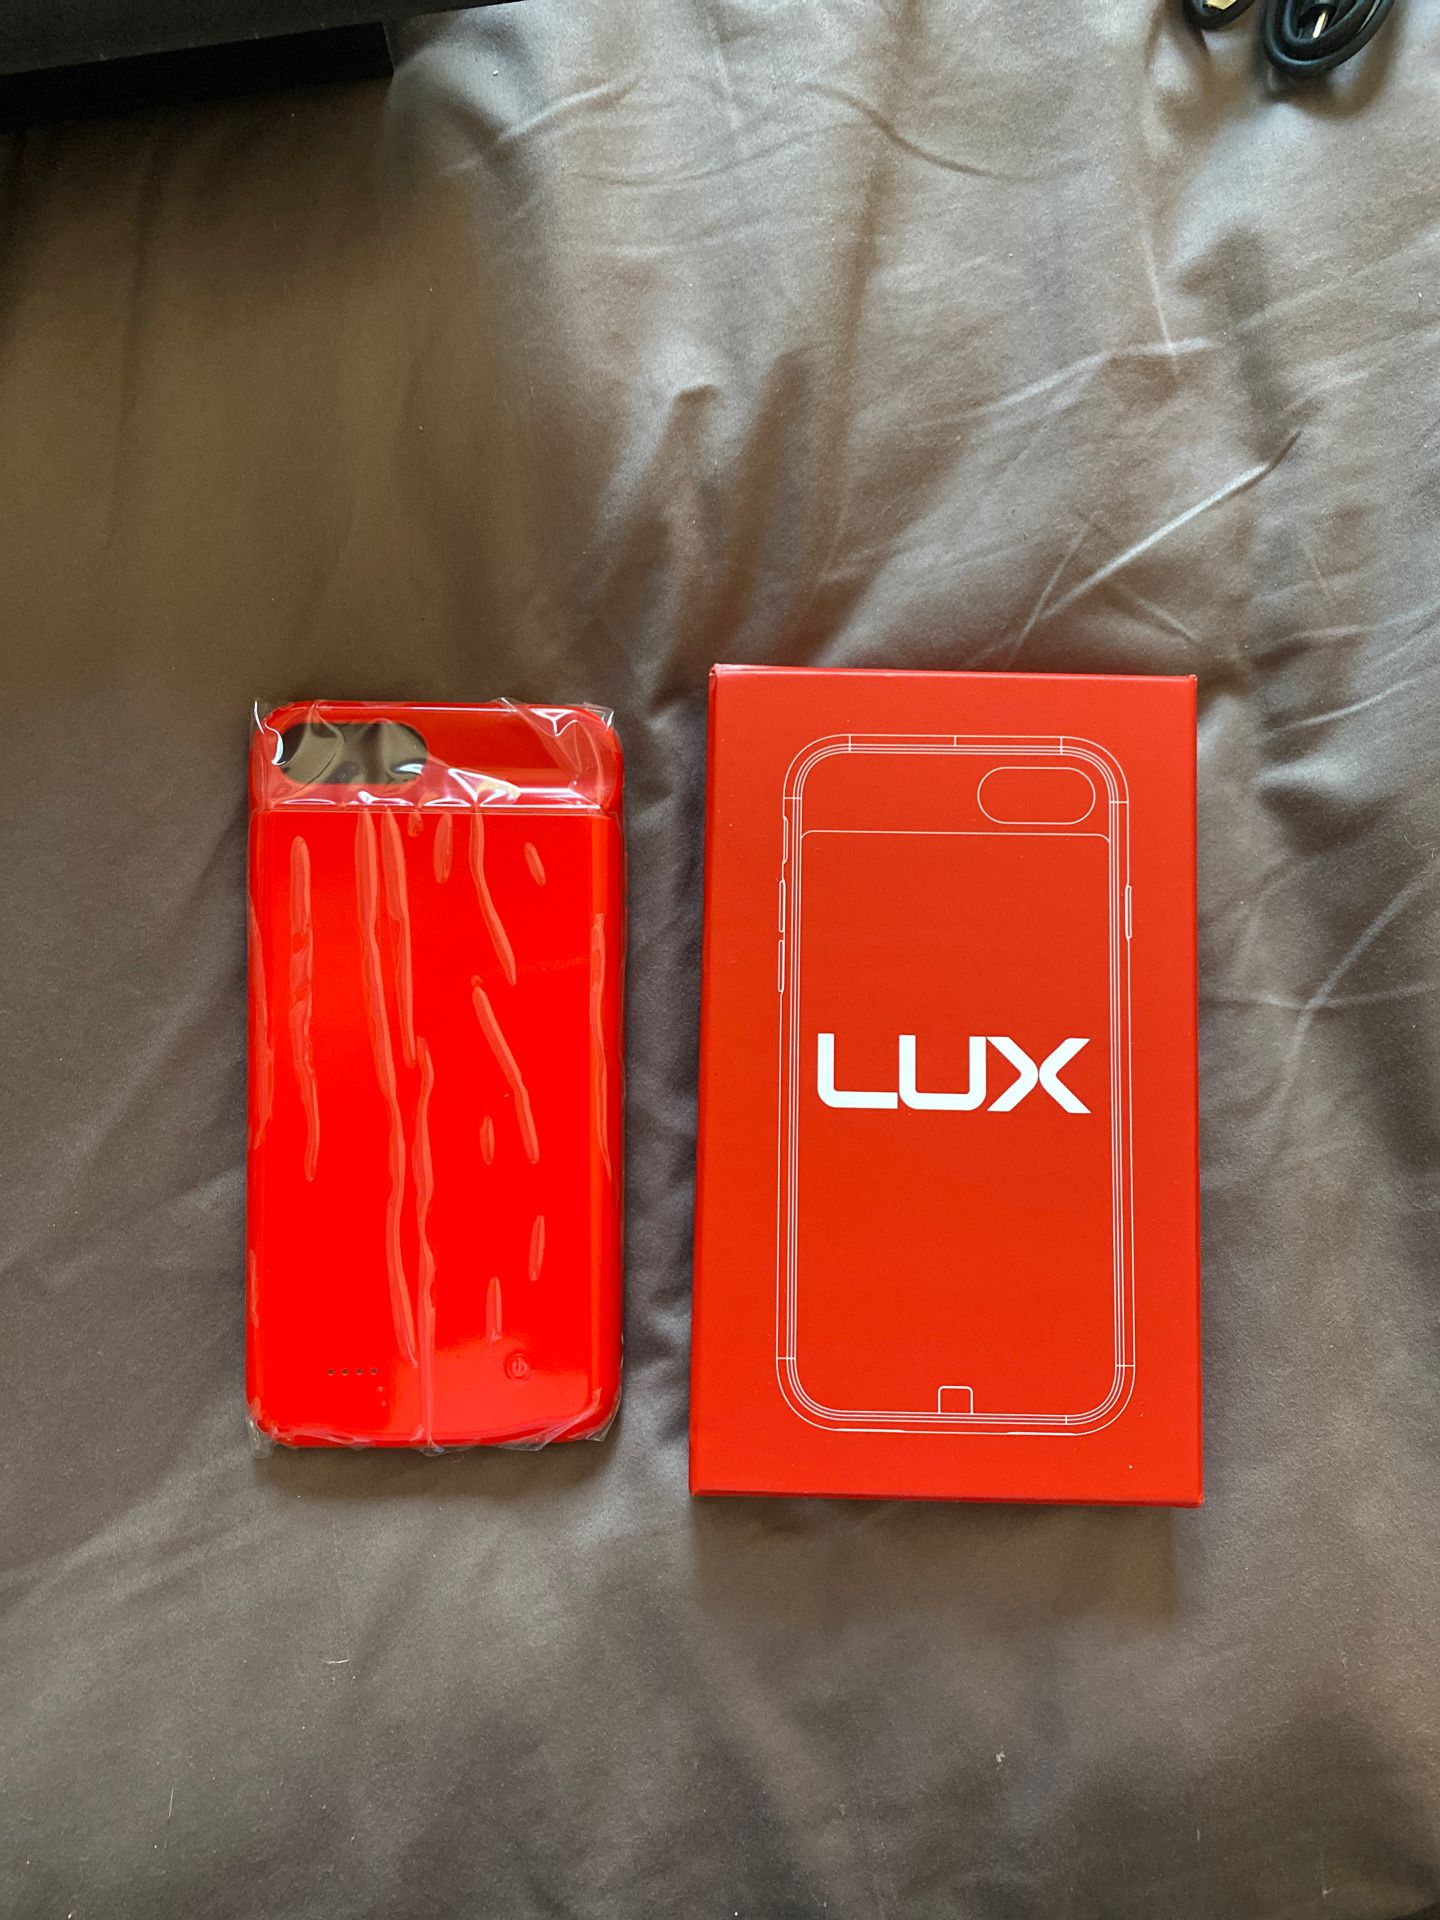 Charging case for iPhone 6/7/8 brand new red